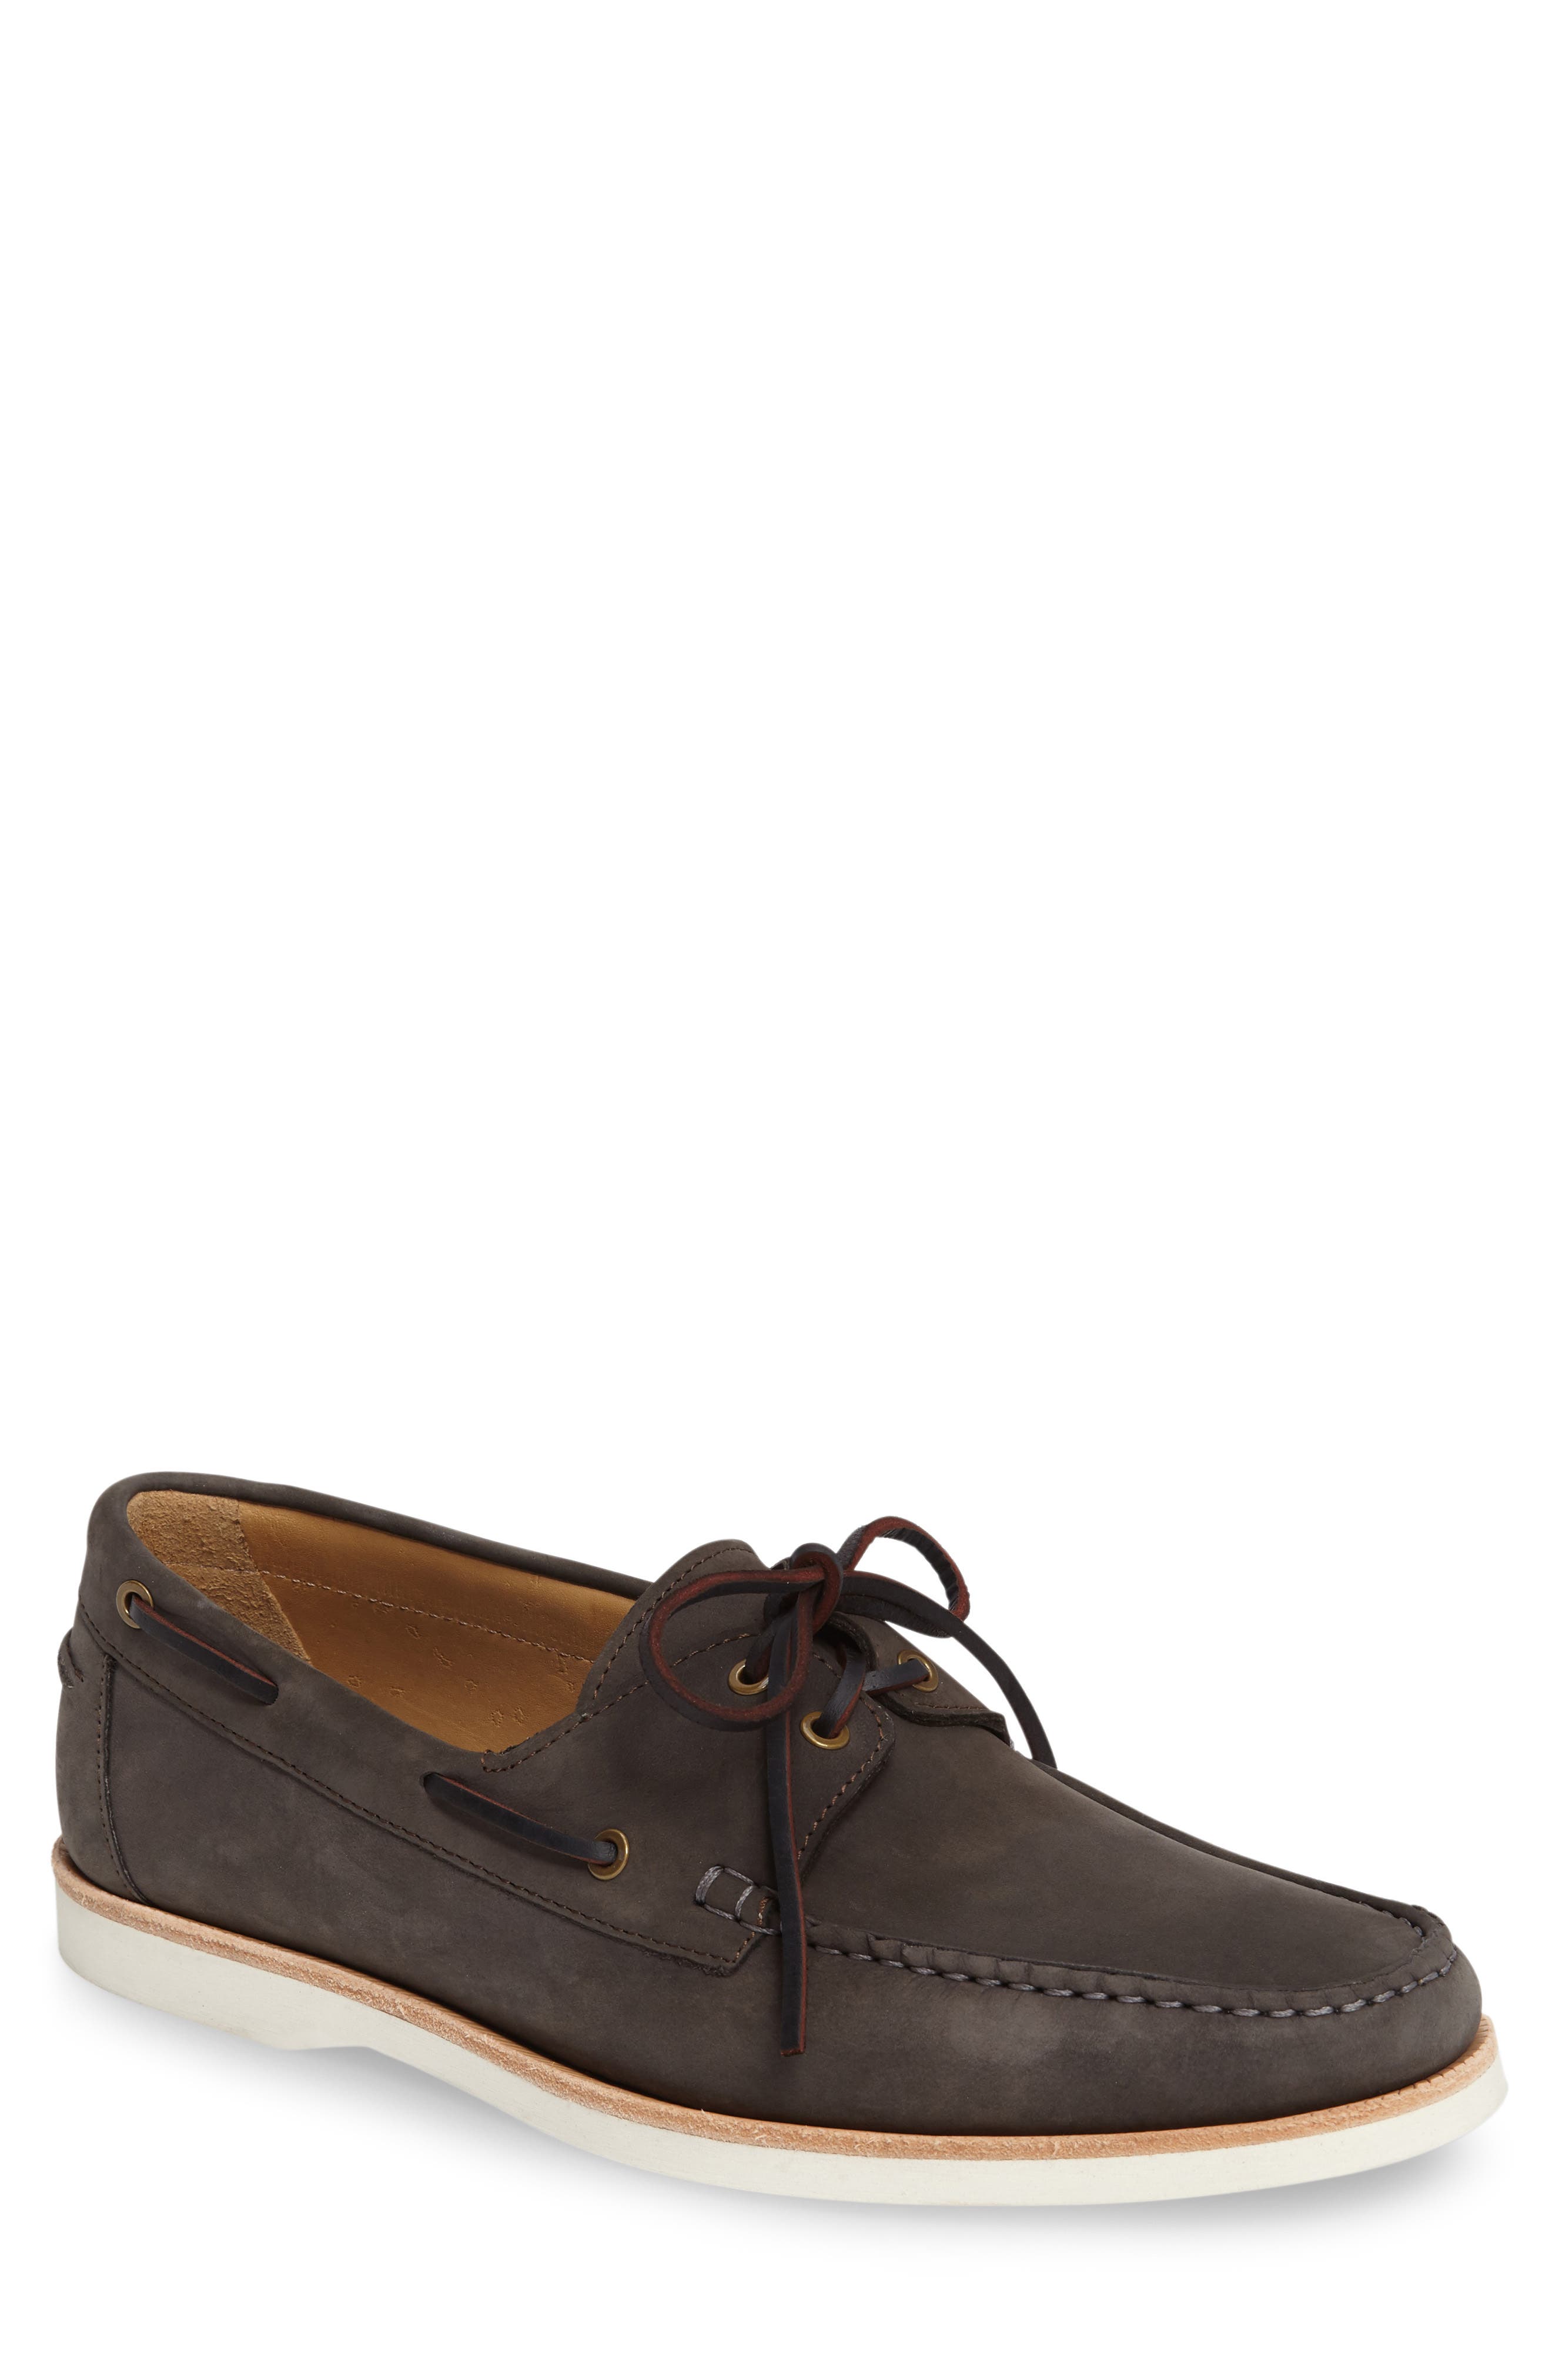 jack erwin boat shoes